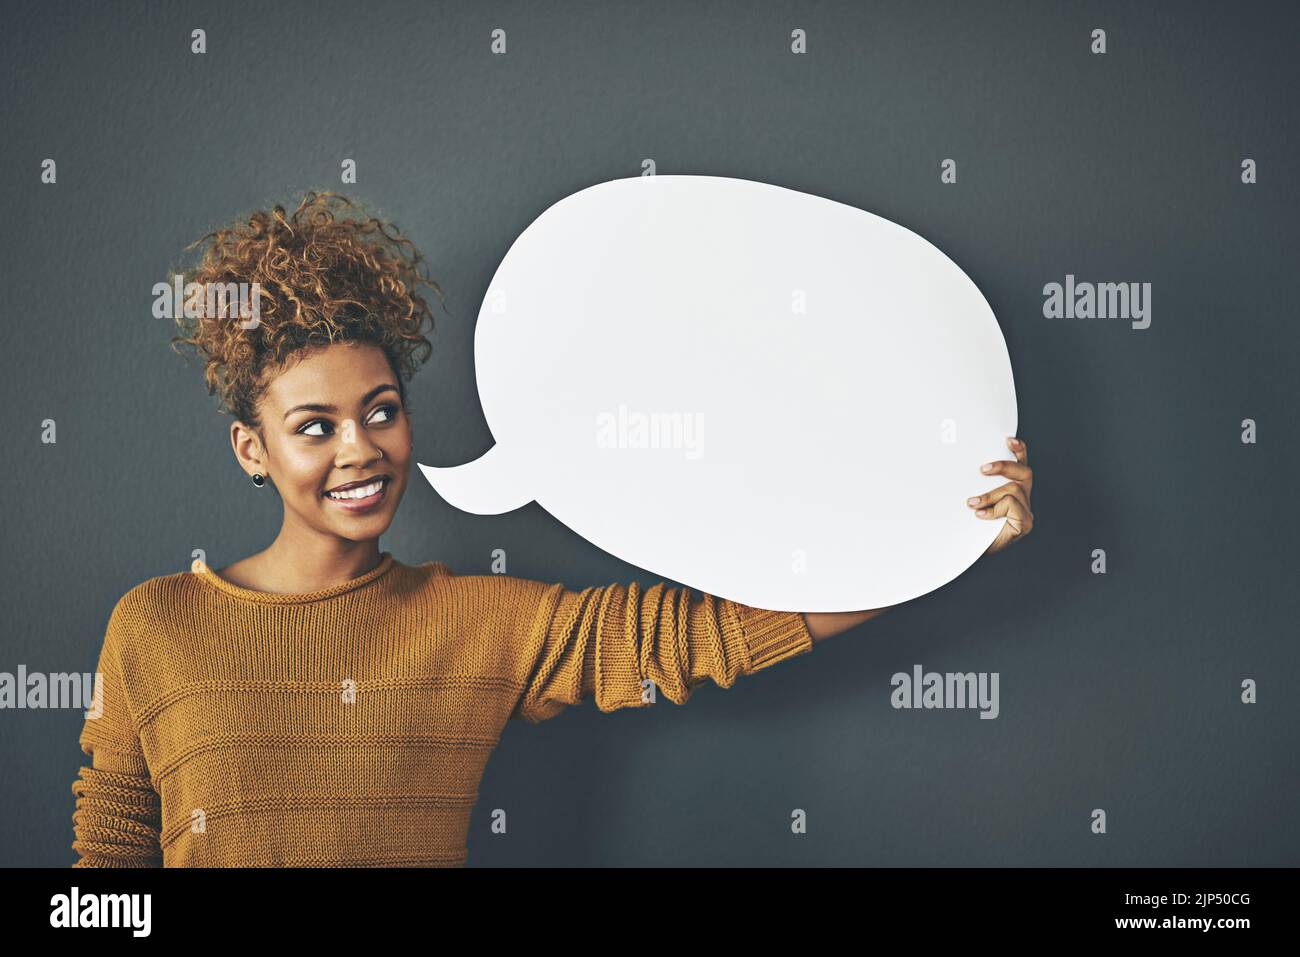 Woman holding speech bubble, chat board and blank copy space poster for voicing opinions, talking on social media or sharing ideas. Creative speaking Stock Photo